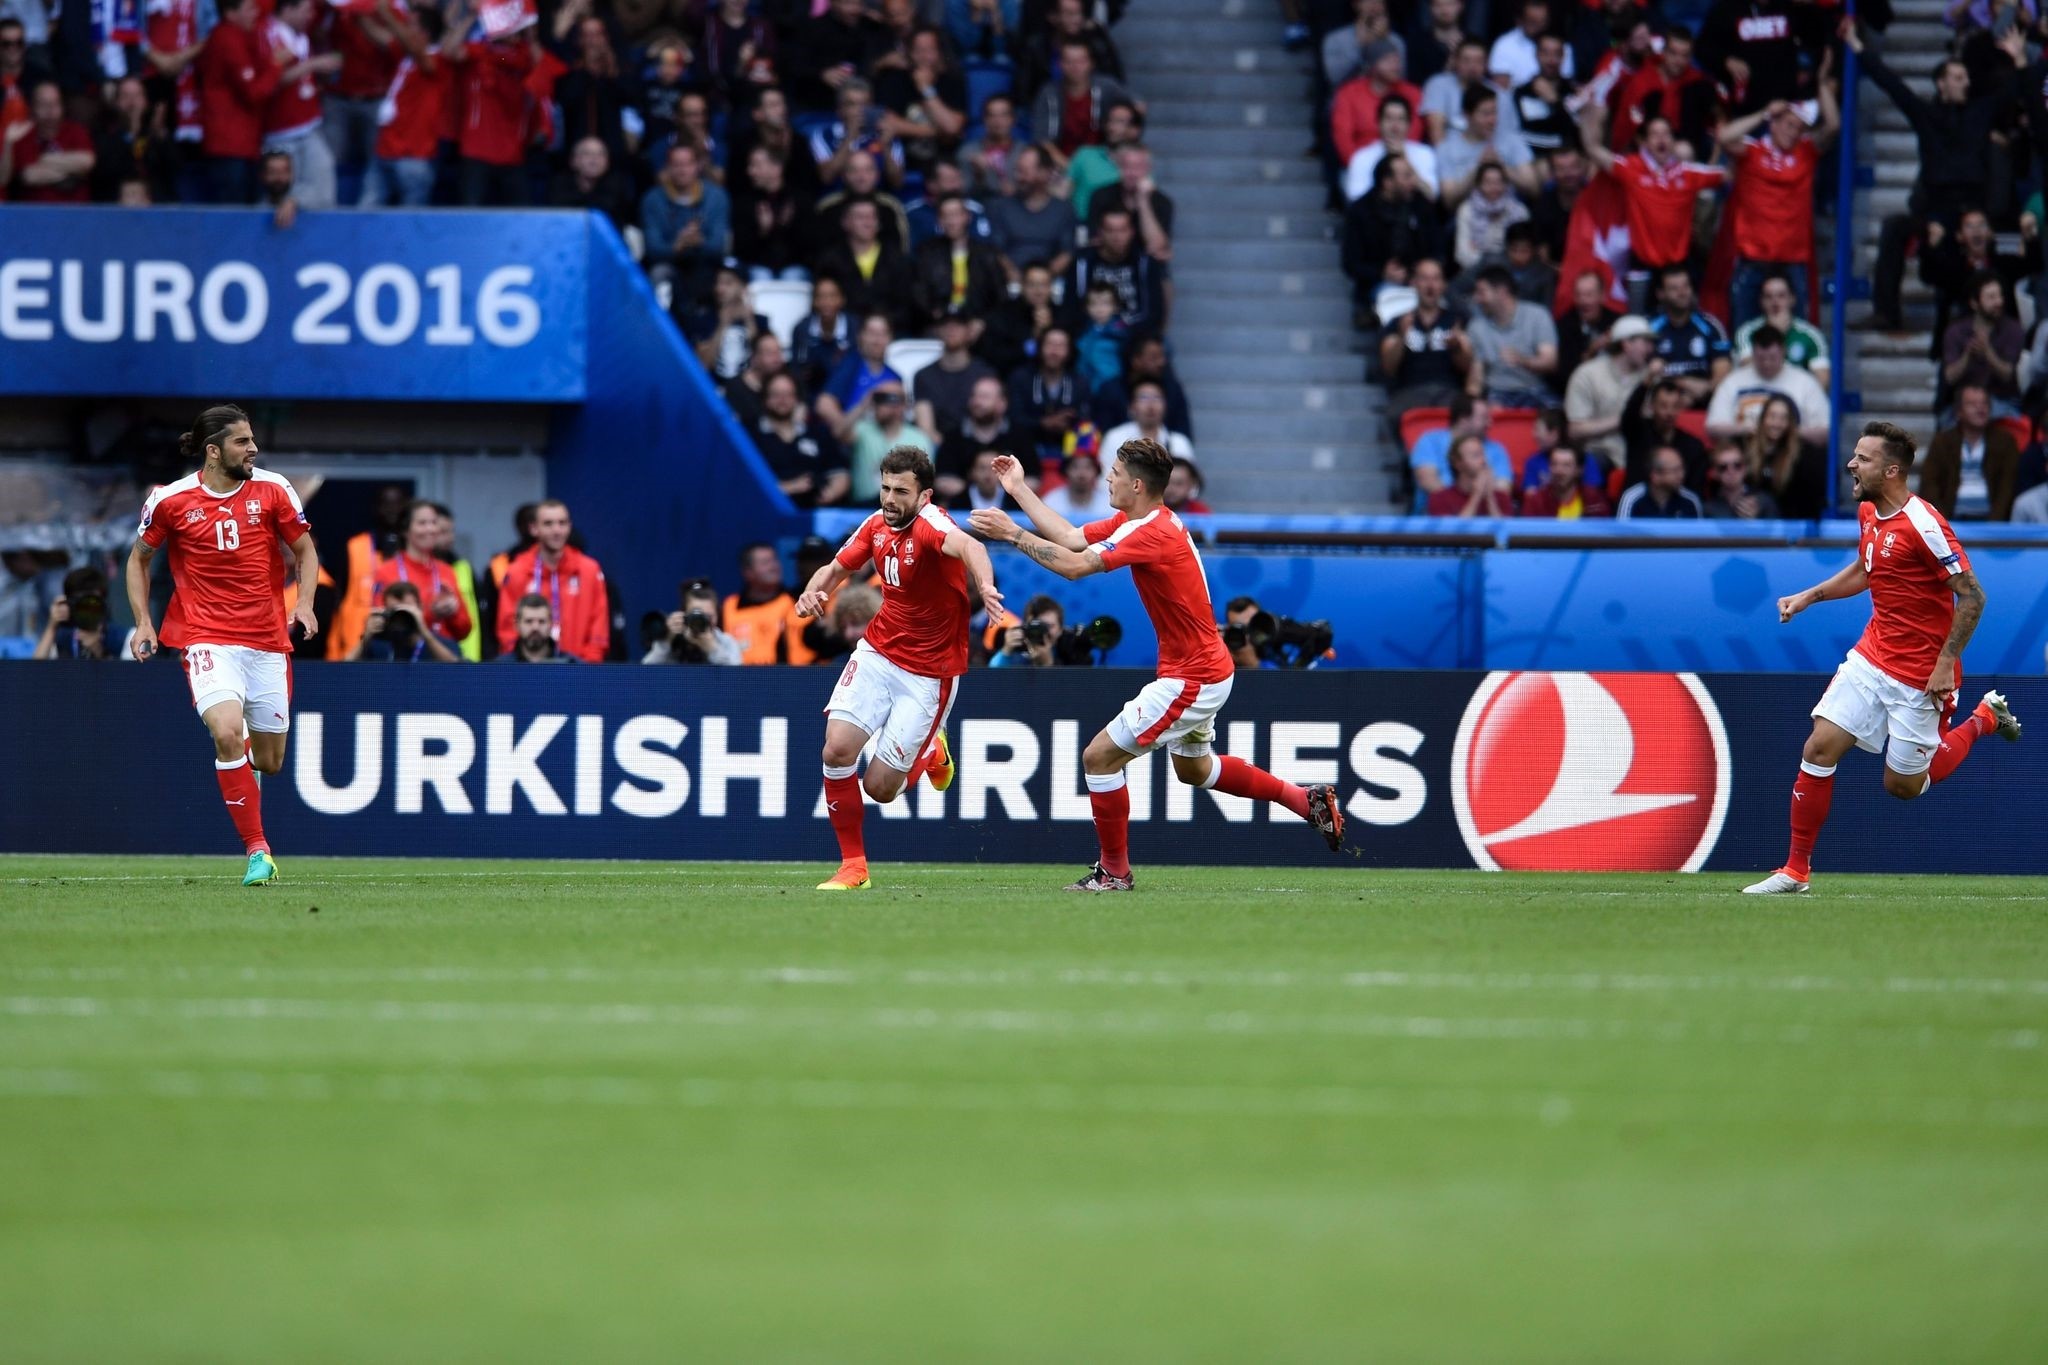 Swiss players celebrate the goal of Switzerland's forward Admir Mehmedi (2nd L) during the Euro 2016 group A football match with Romania. (AFP Photo)